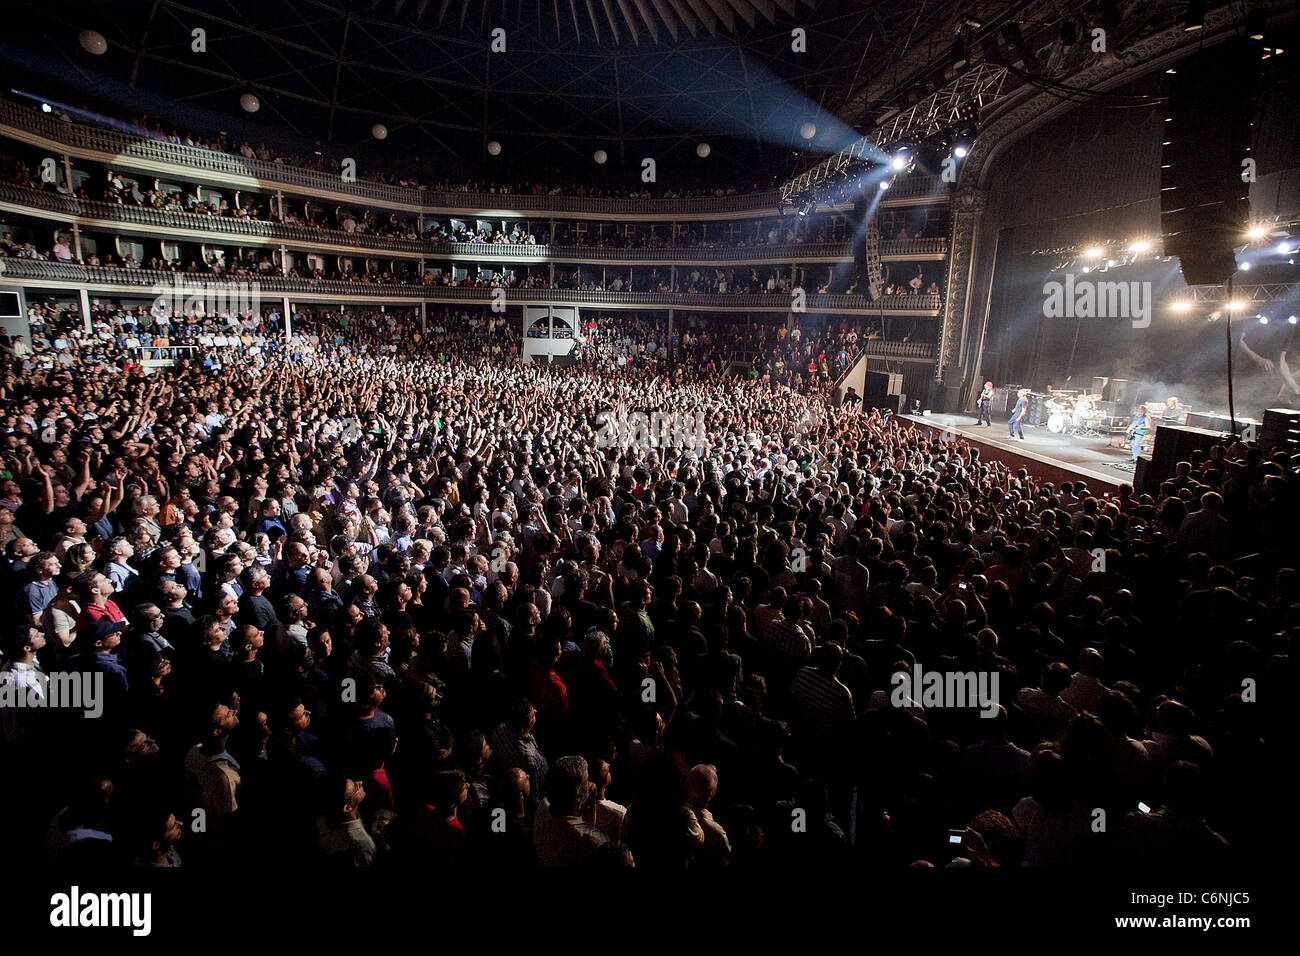 Crowd of fans watching Deep Purple, performing live at Coliseu dos Recreios  Lisbon, Portugal - 14.07.10 Stock Photo - Alamy